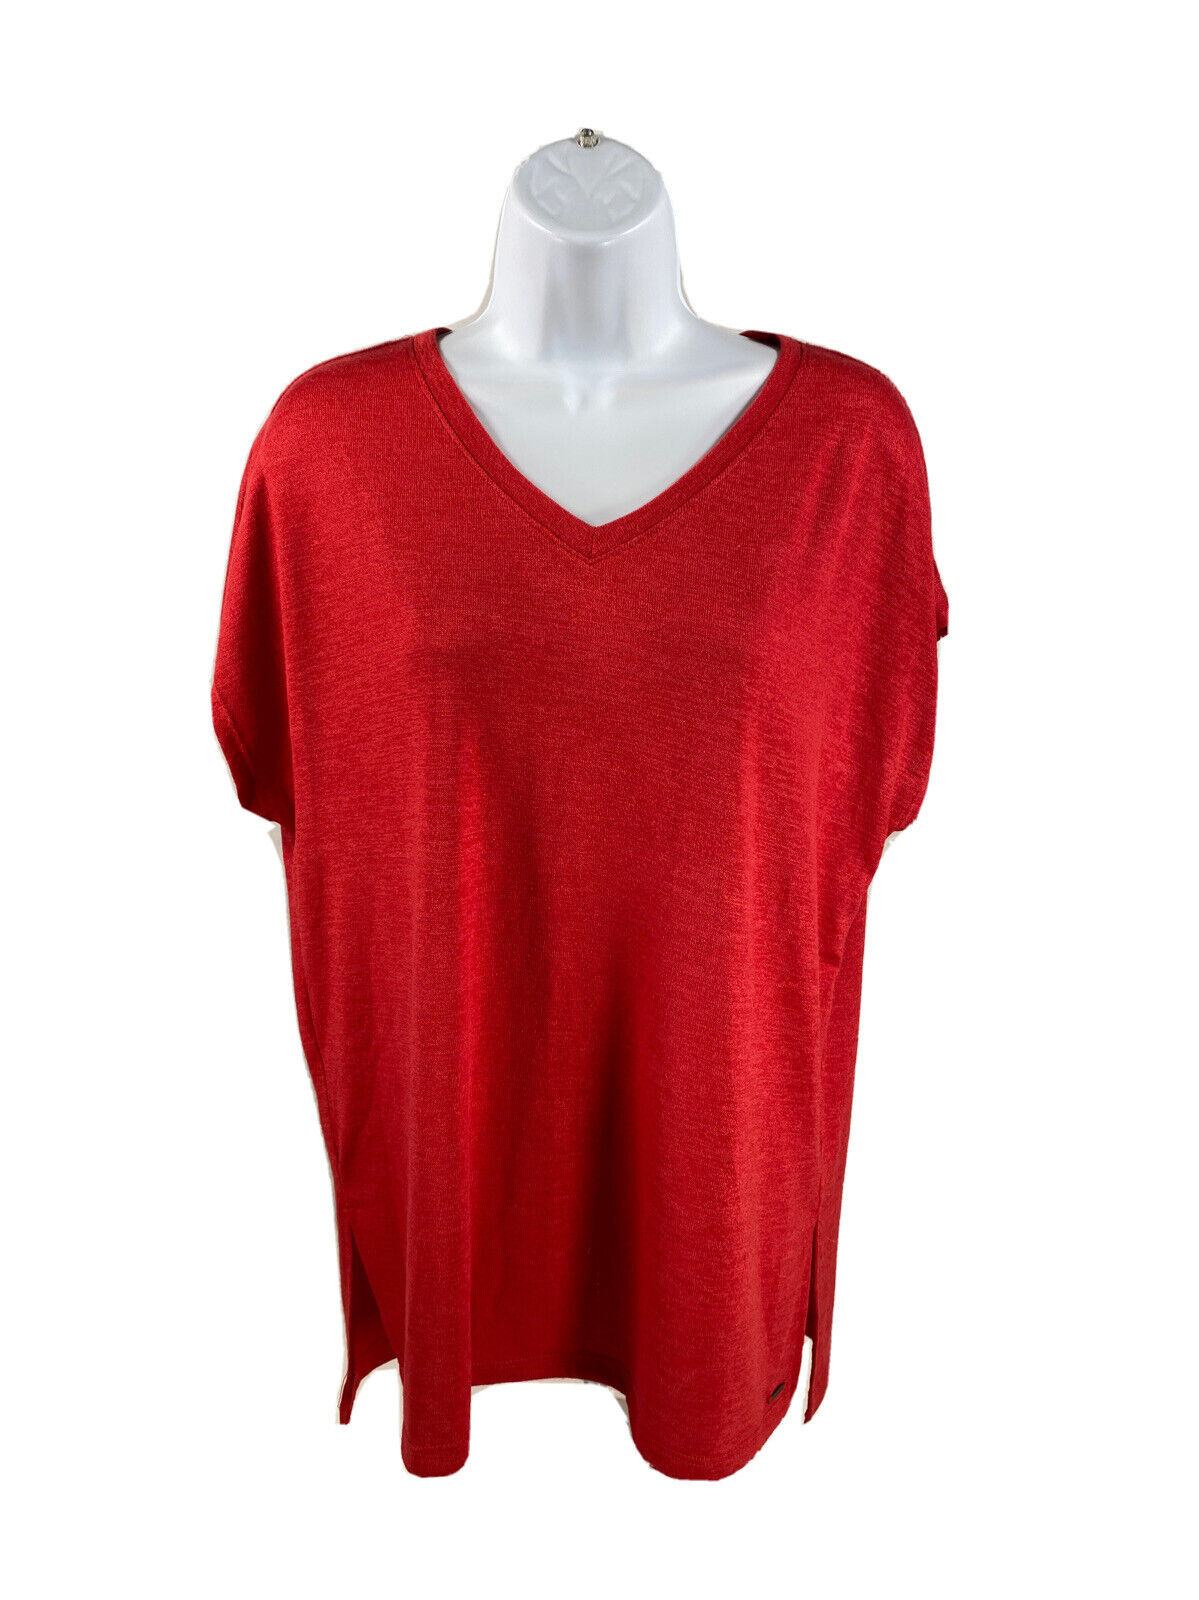 NEW Orvis Women's Red Cap Sleeve Tunic Knit Top Shirt - M